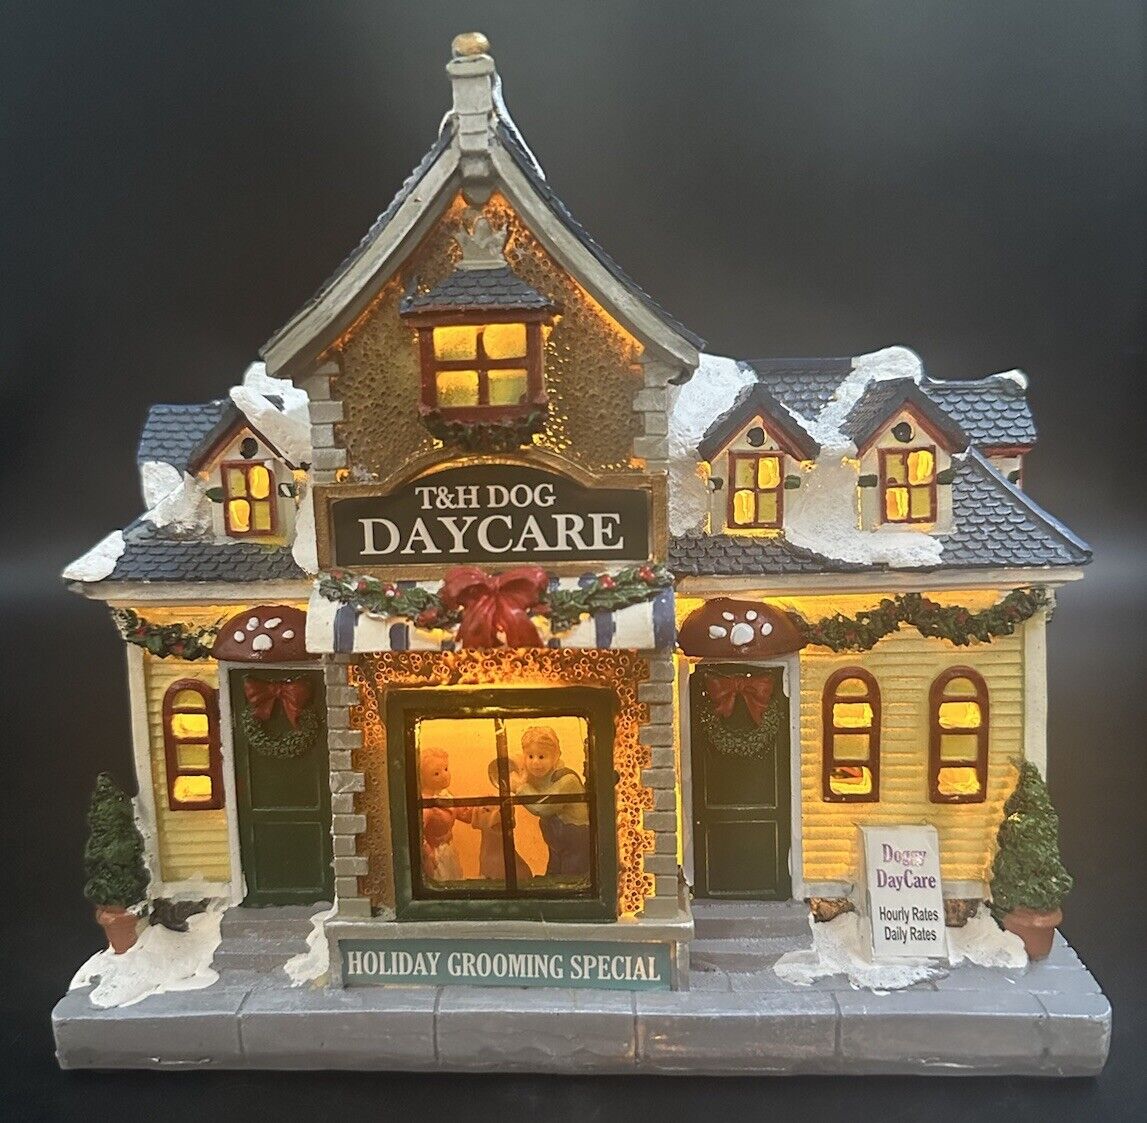 Carole Towne Christmas Village T&H Dog Daycare Pre-owned  RARE  find….2019